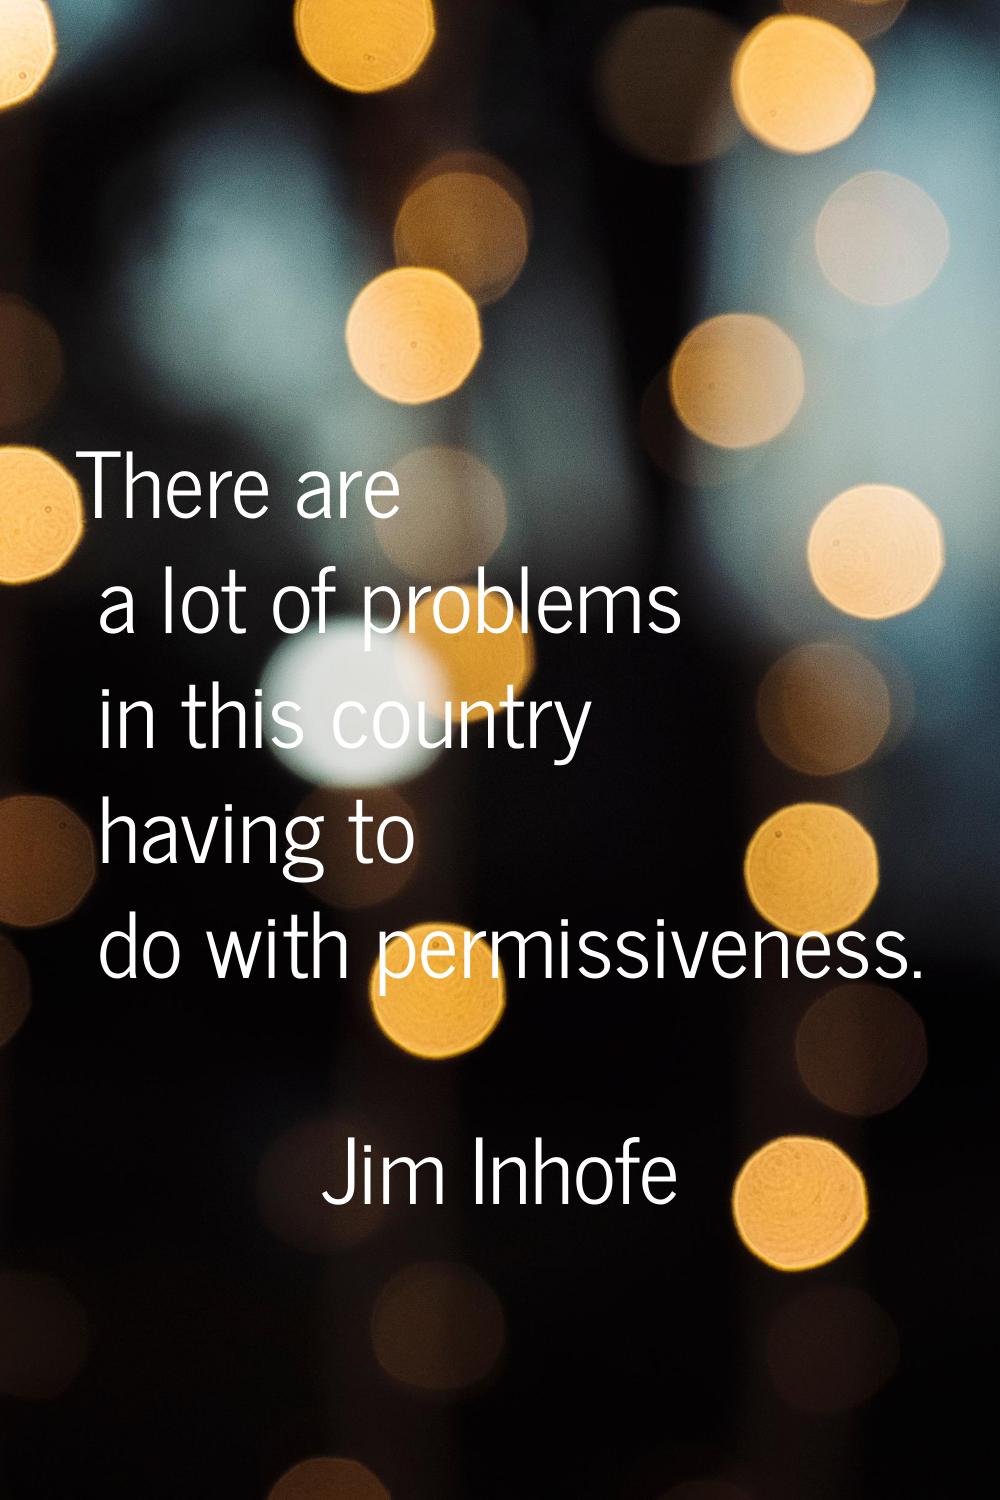 There are a lot of problems in this country having to do with permissiveness.